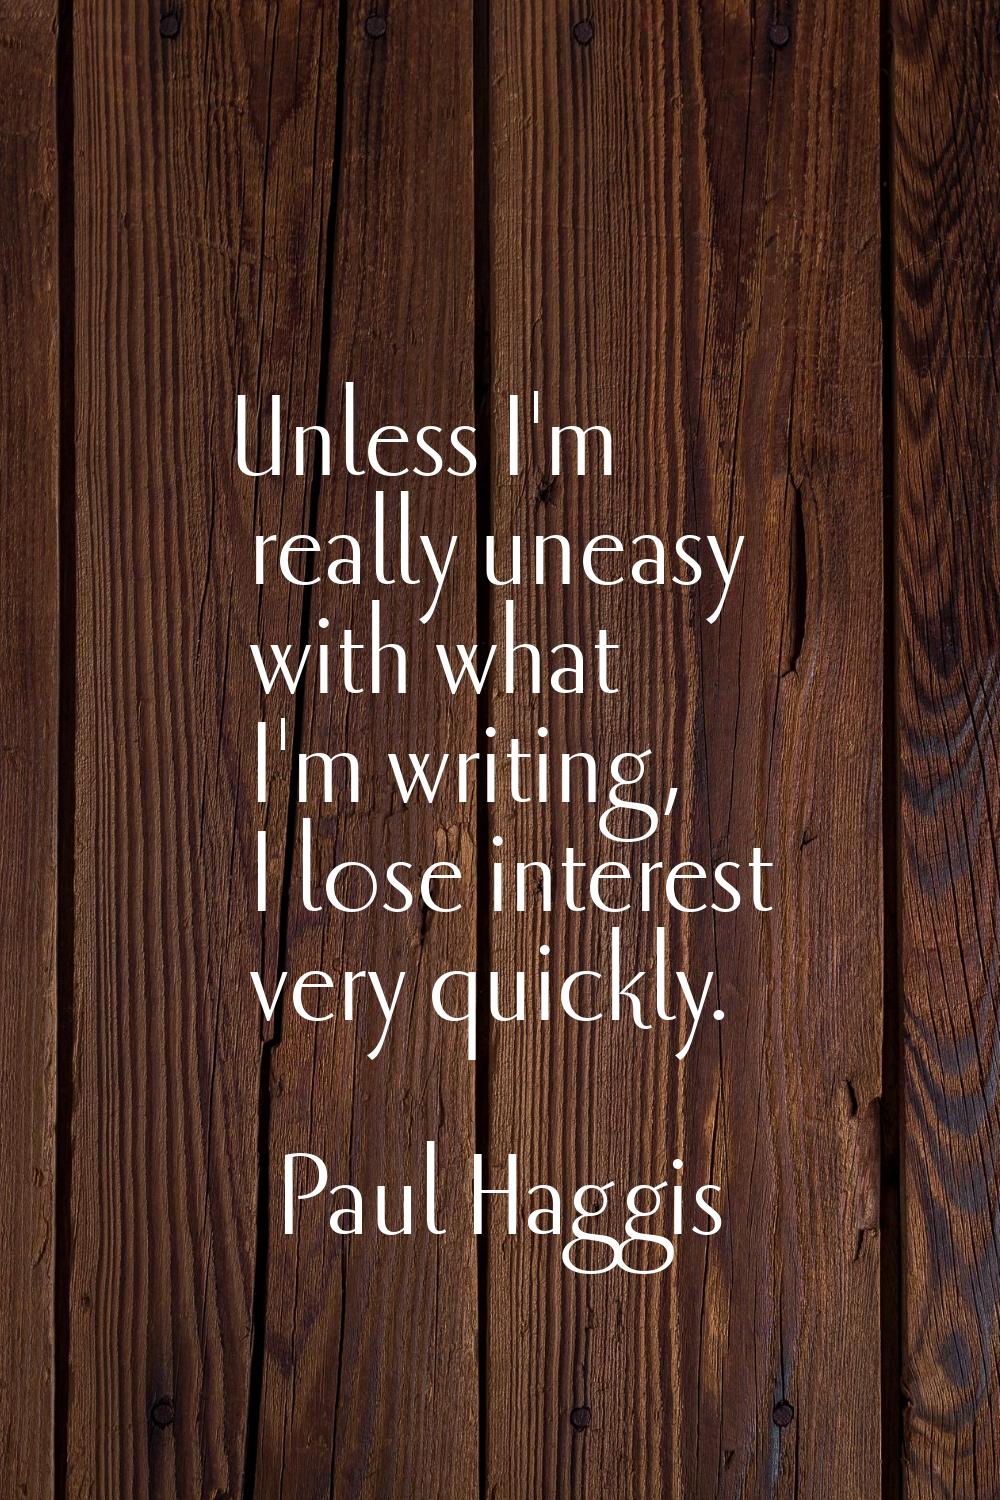 Unless I'm really uneasy with what I'm writing, I lose interest very quickly.